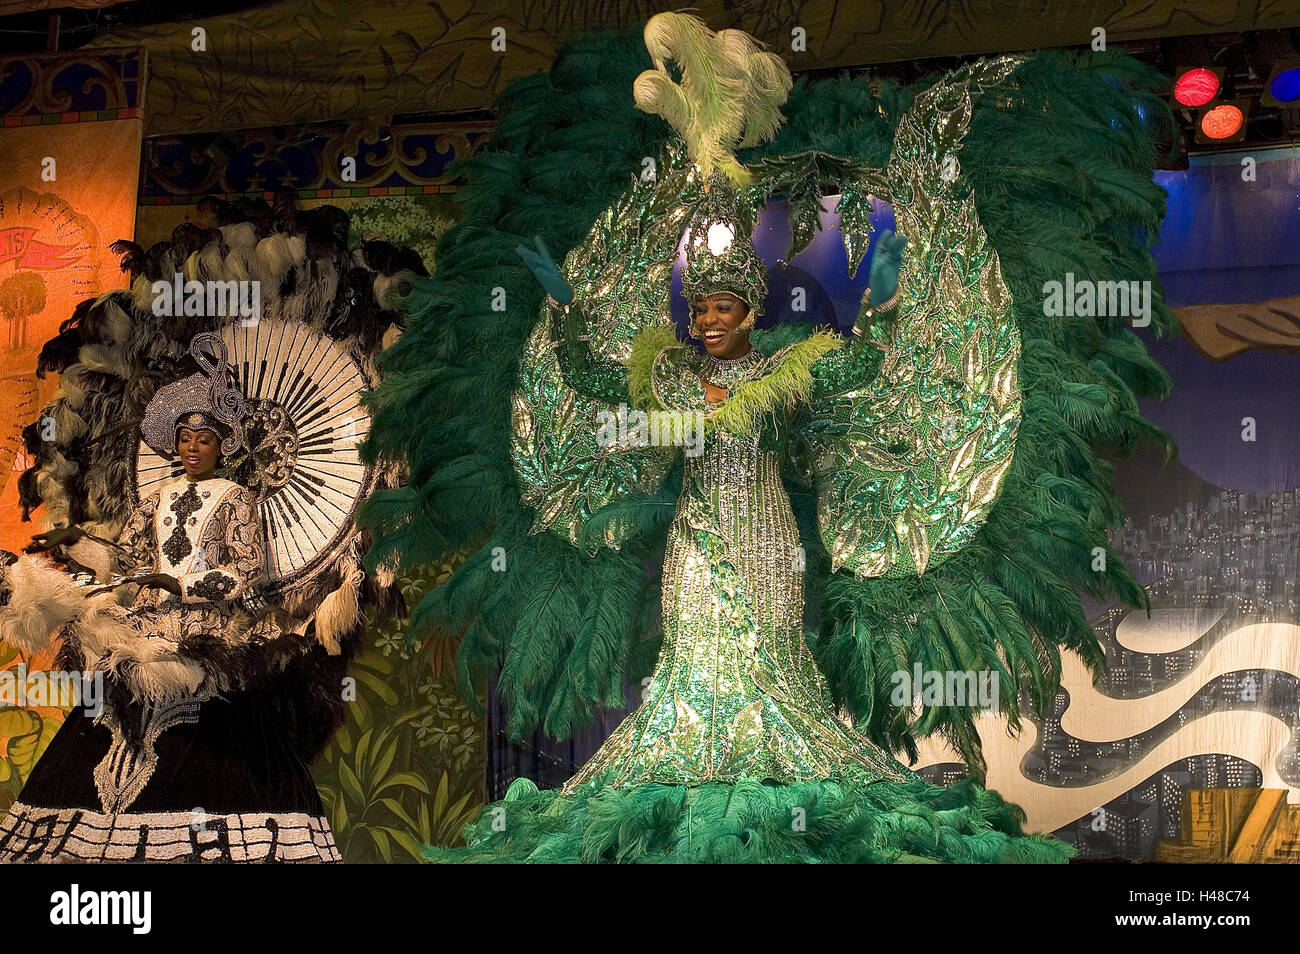 South American Carnival dancers in amazing outfits